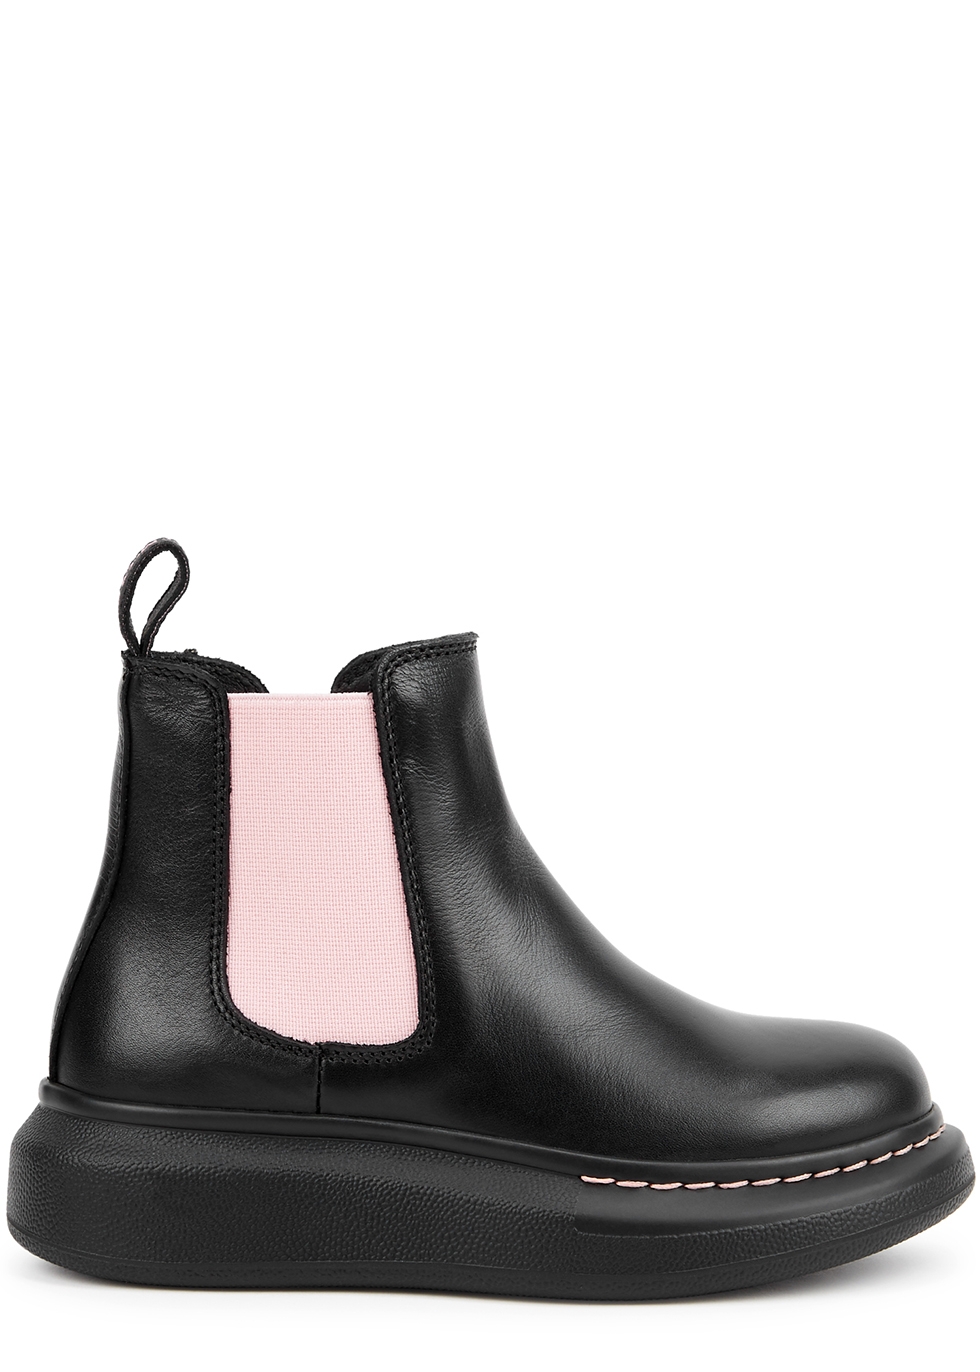 KIDS Pink and black leather Chelsea boots